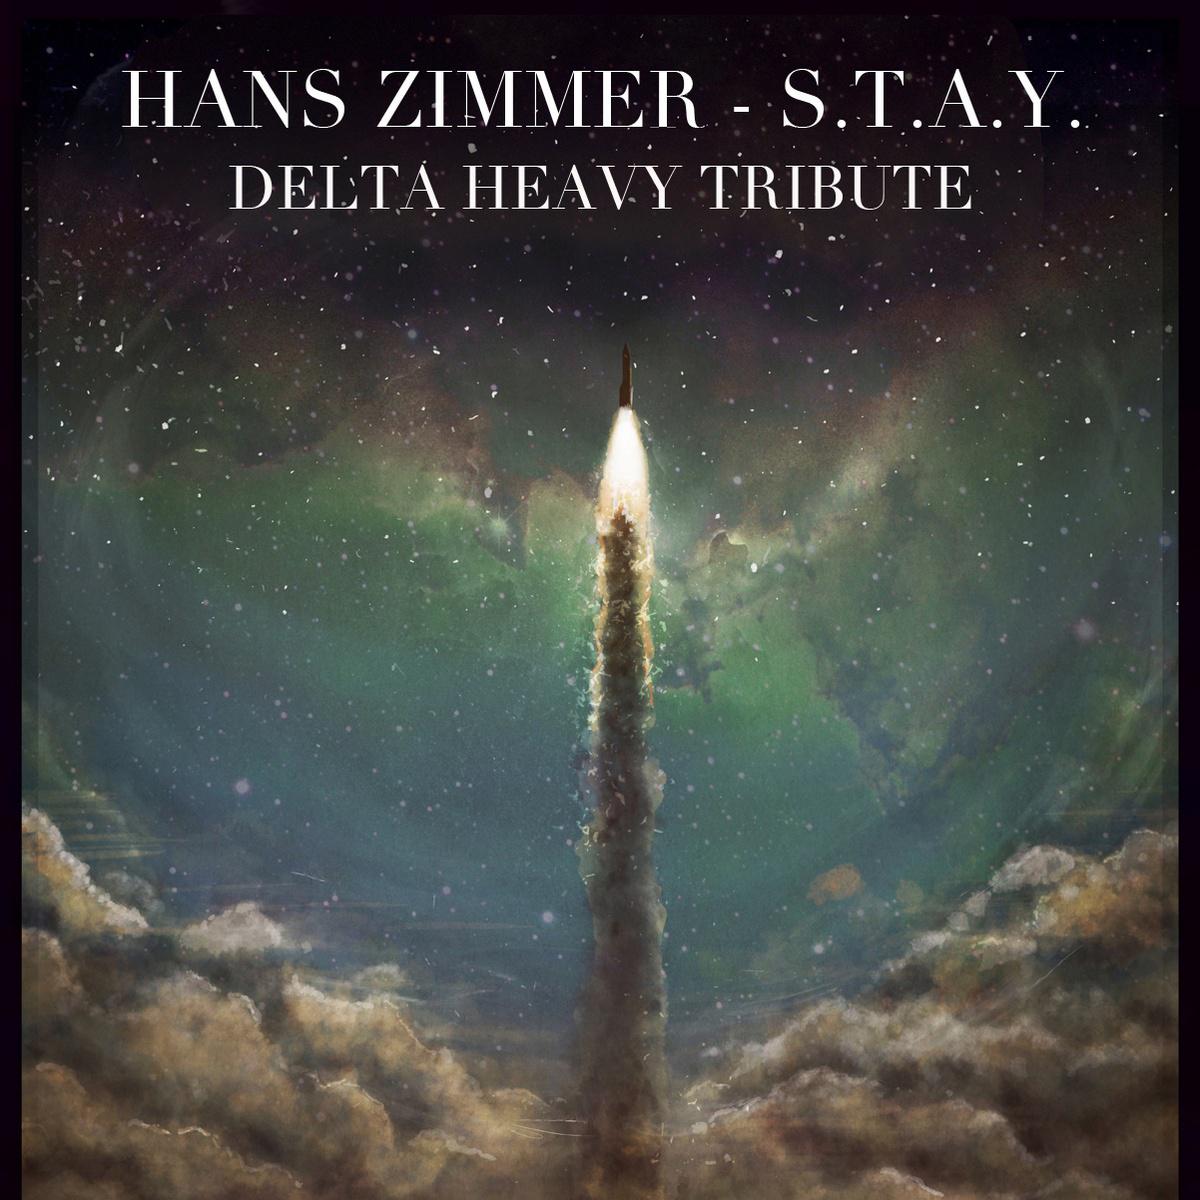 S.T.A.Y. (Delta Heavy Tribute)